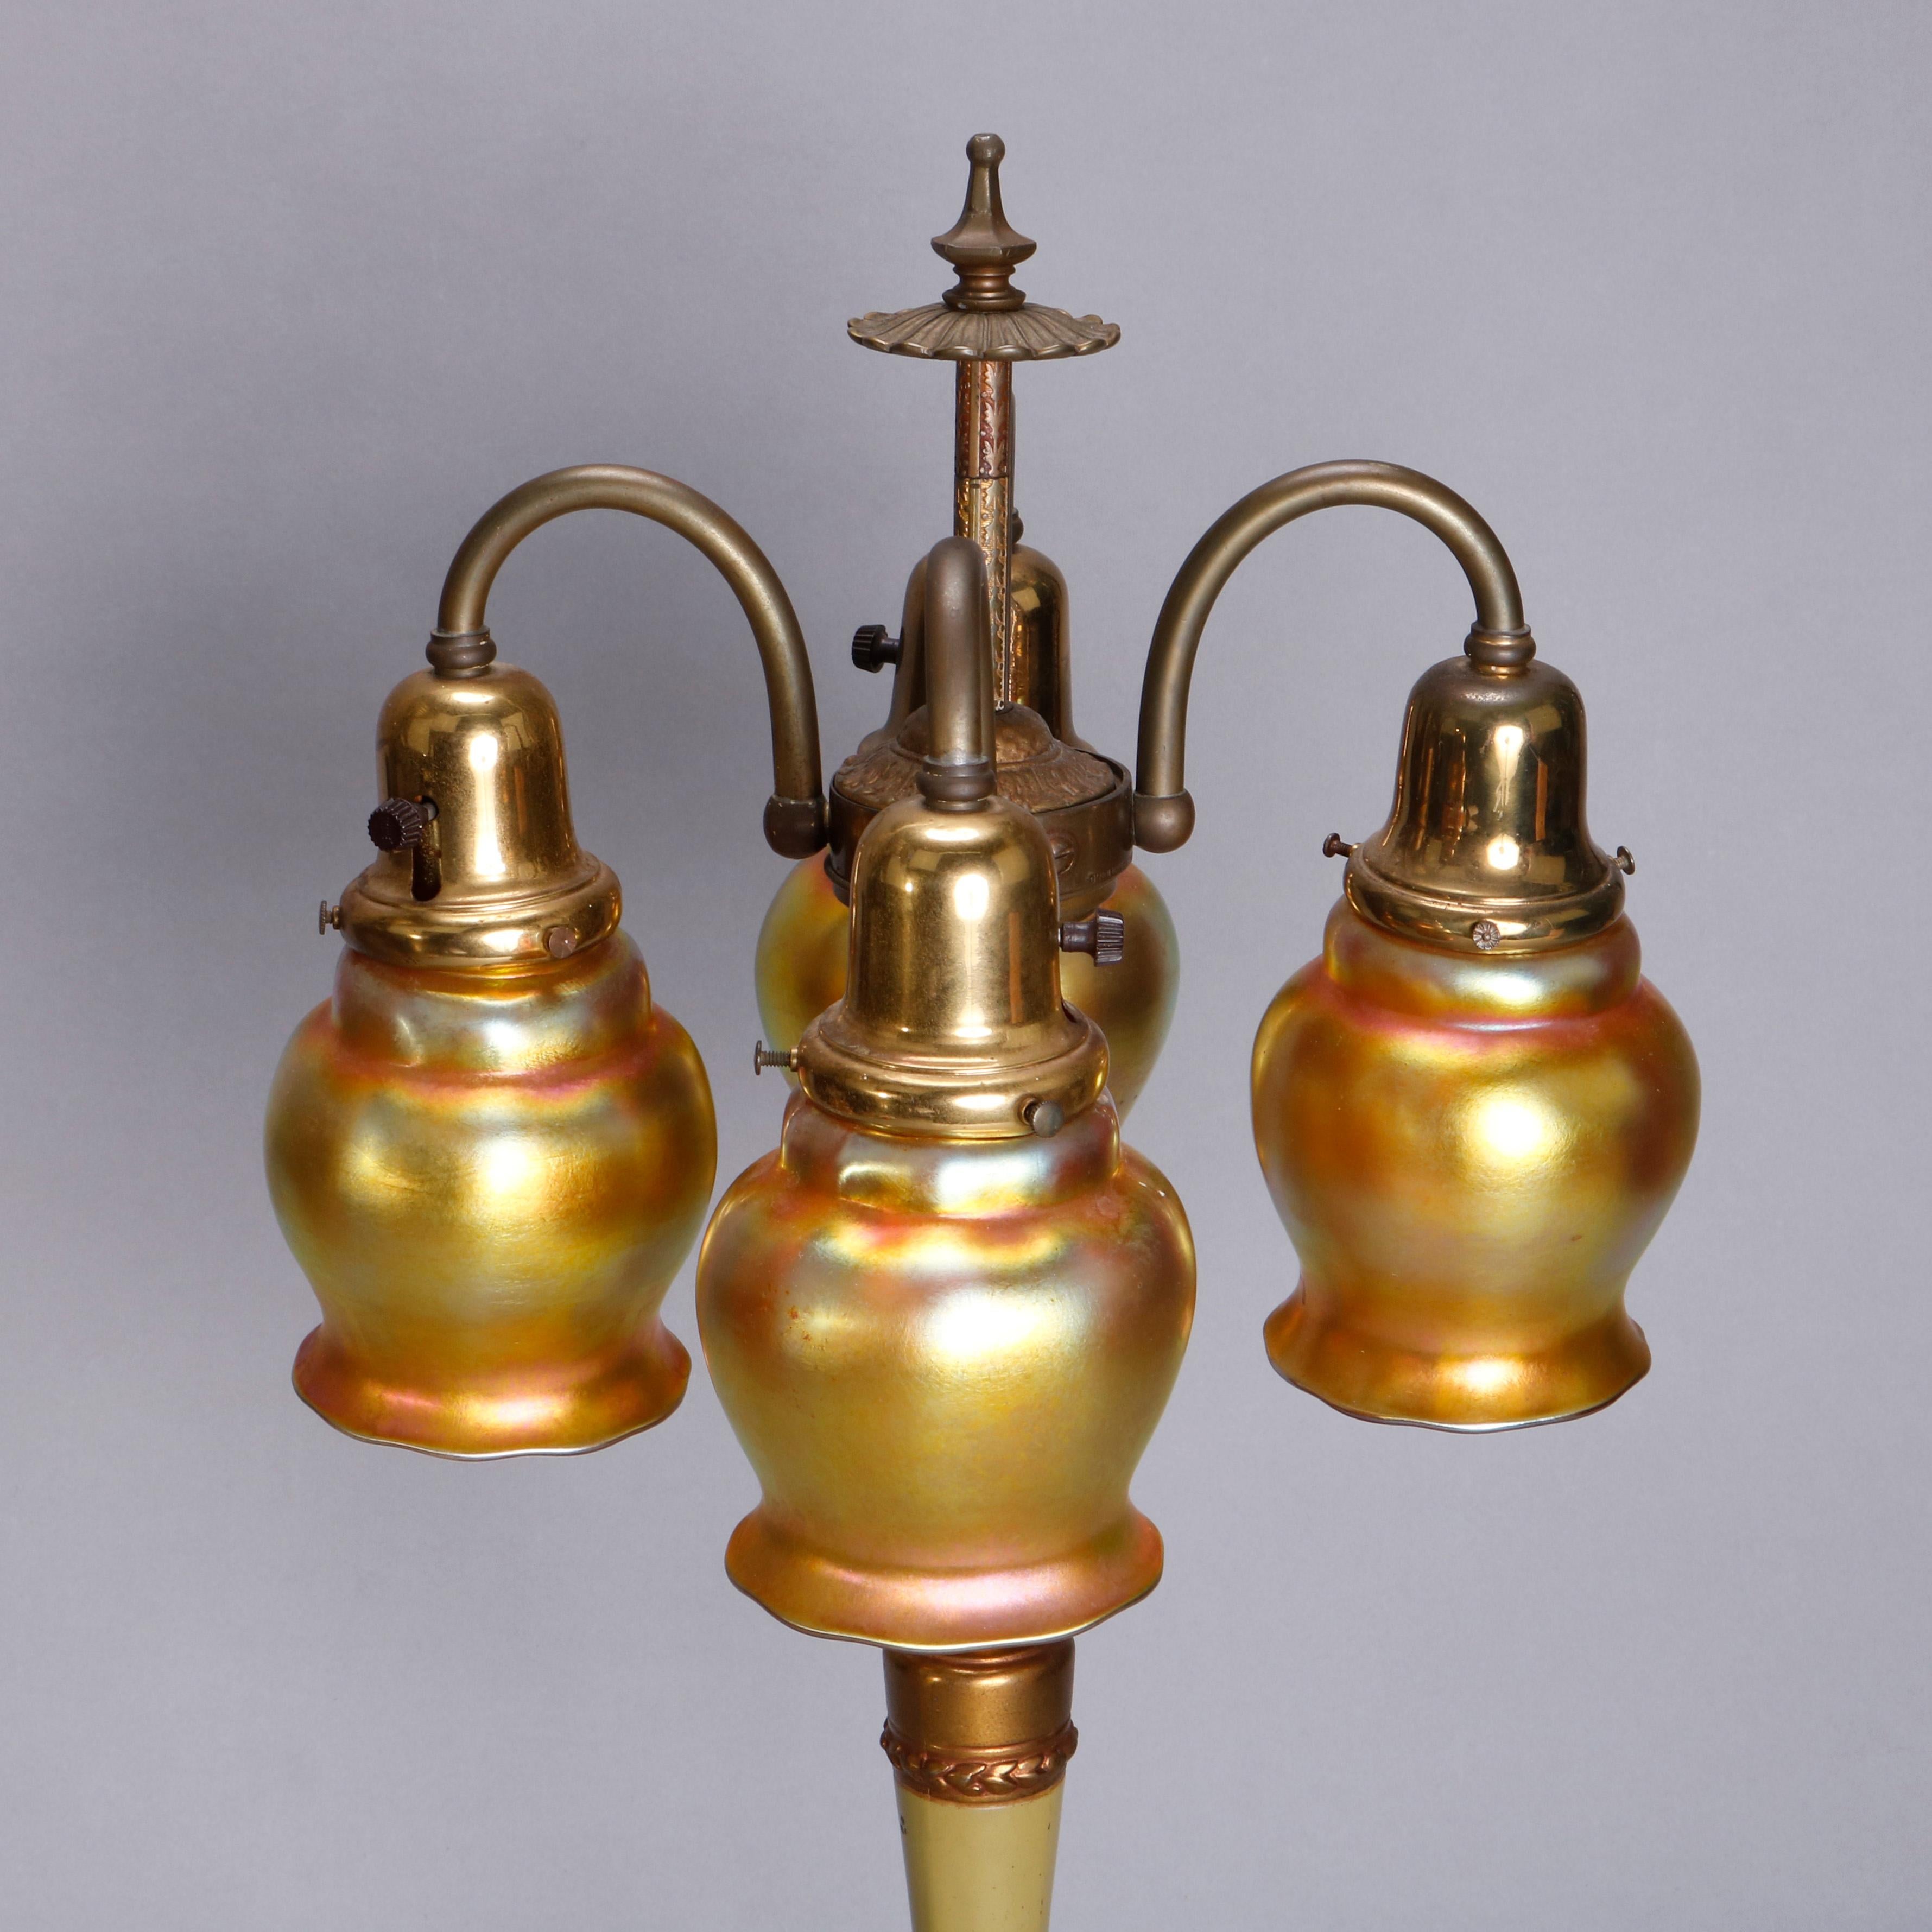 An Arts & Crafts table lamp offers column-form base with acanthus decoration and having four C-scroll arms terminating in gold aurene Steuben art glass tulip form shades, circa 1920

Measures: 25.5